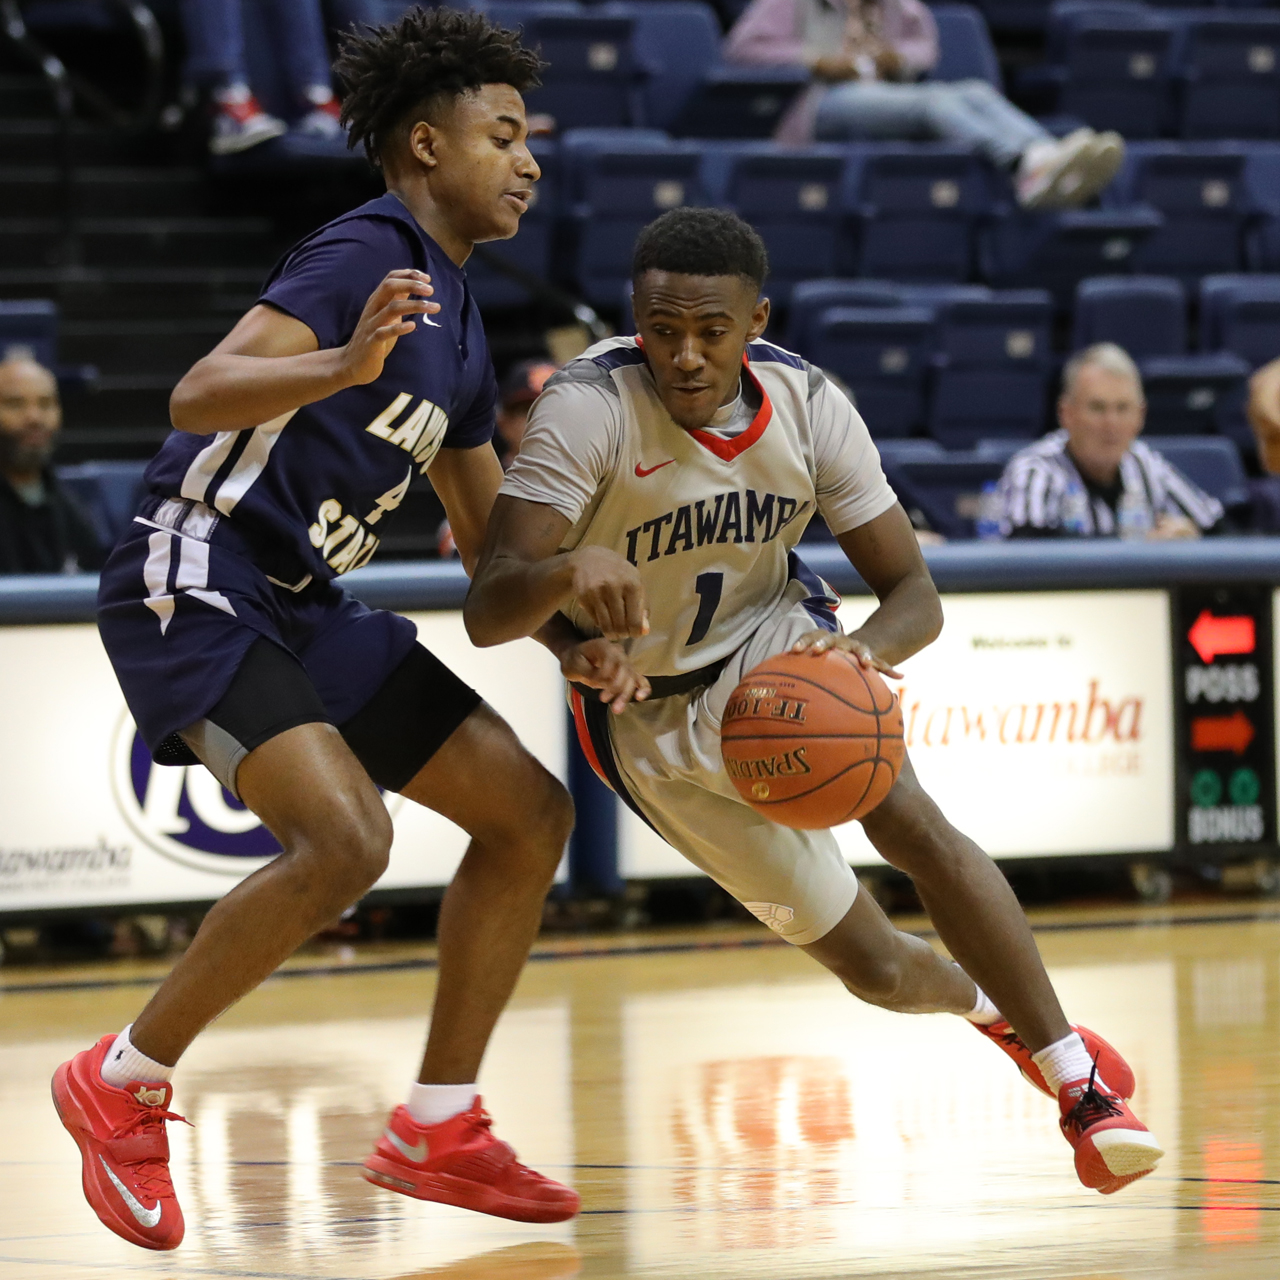 Indians fall to Lawson State, 60-53